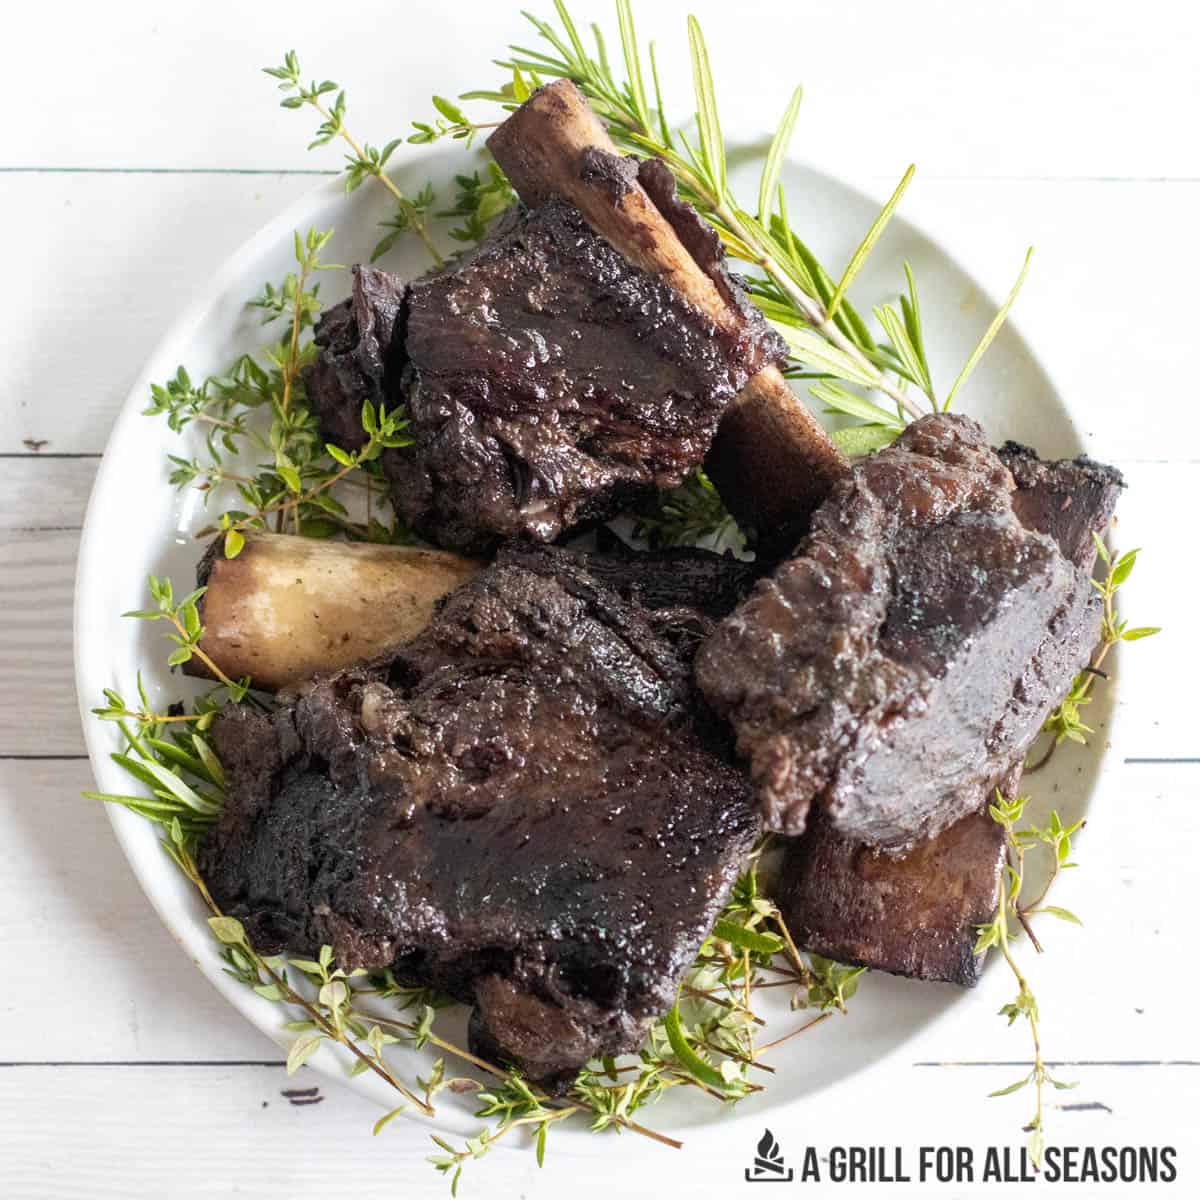 How to Smoke Beef Short Ribs